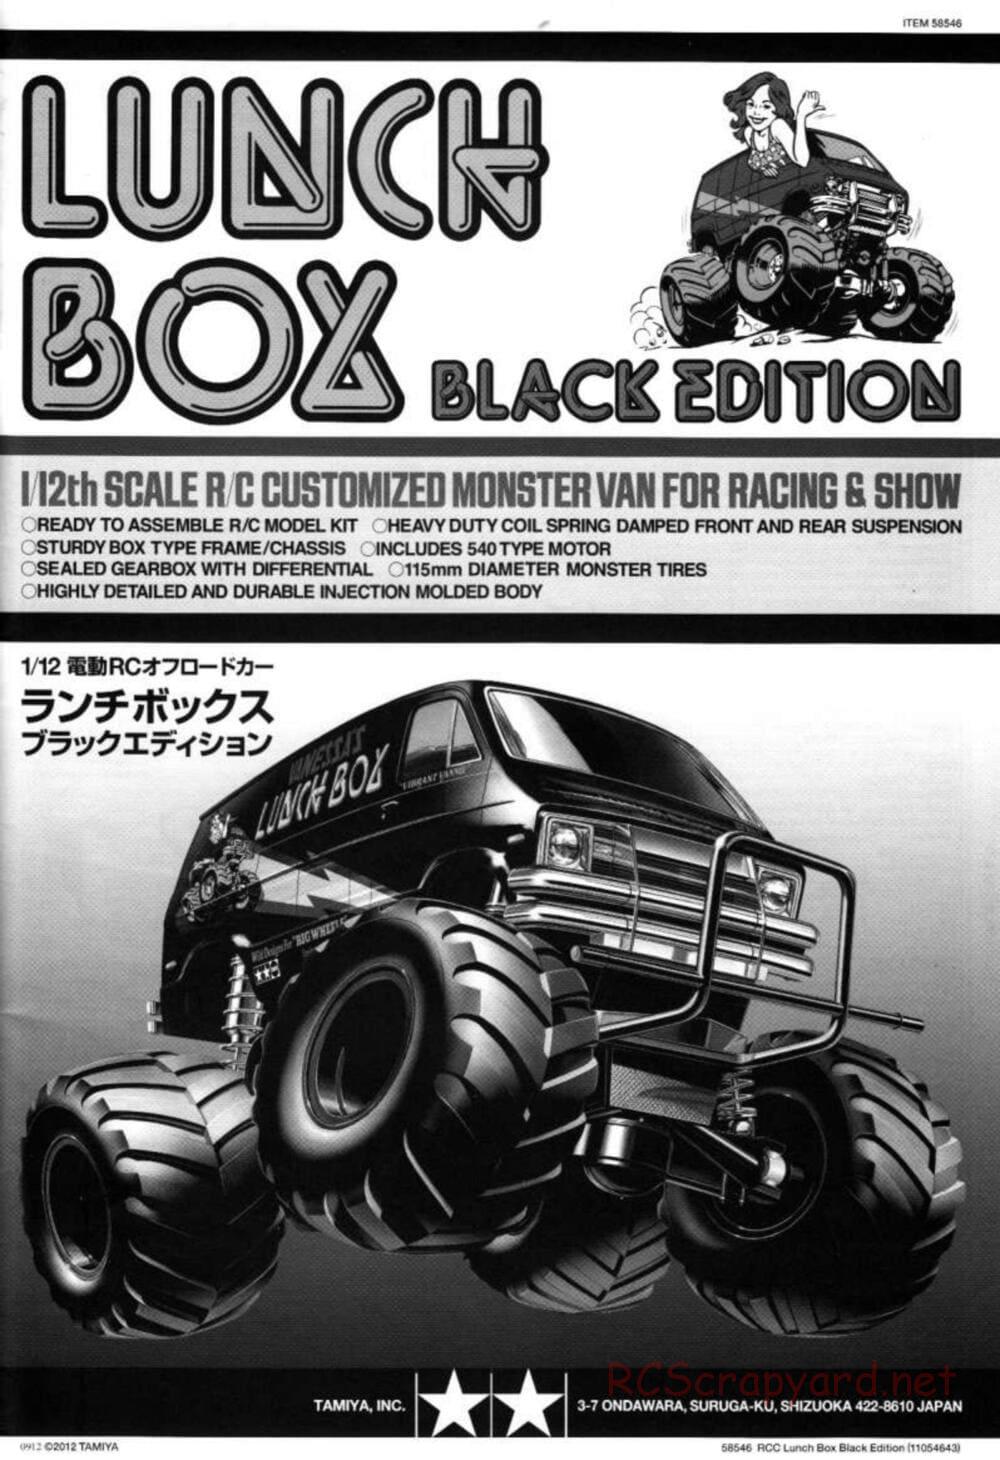 Tamiya - Lunch Box - Black Edition - CW-01 Chassis - Manual - Page 1